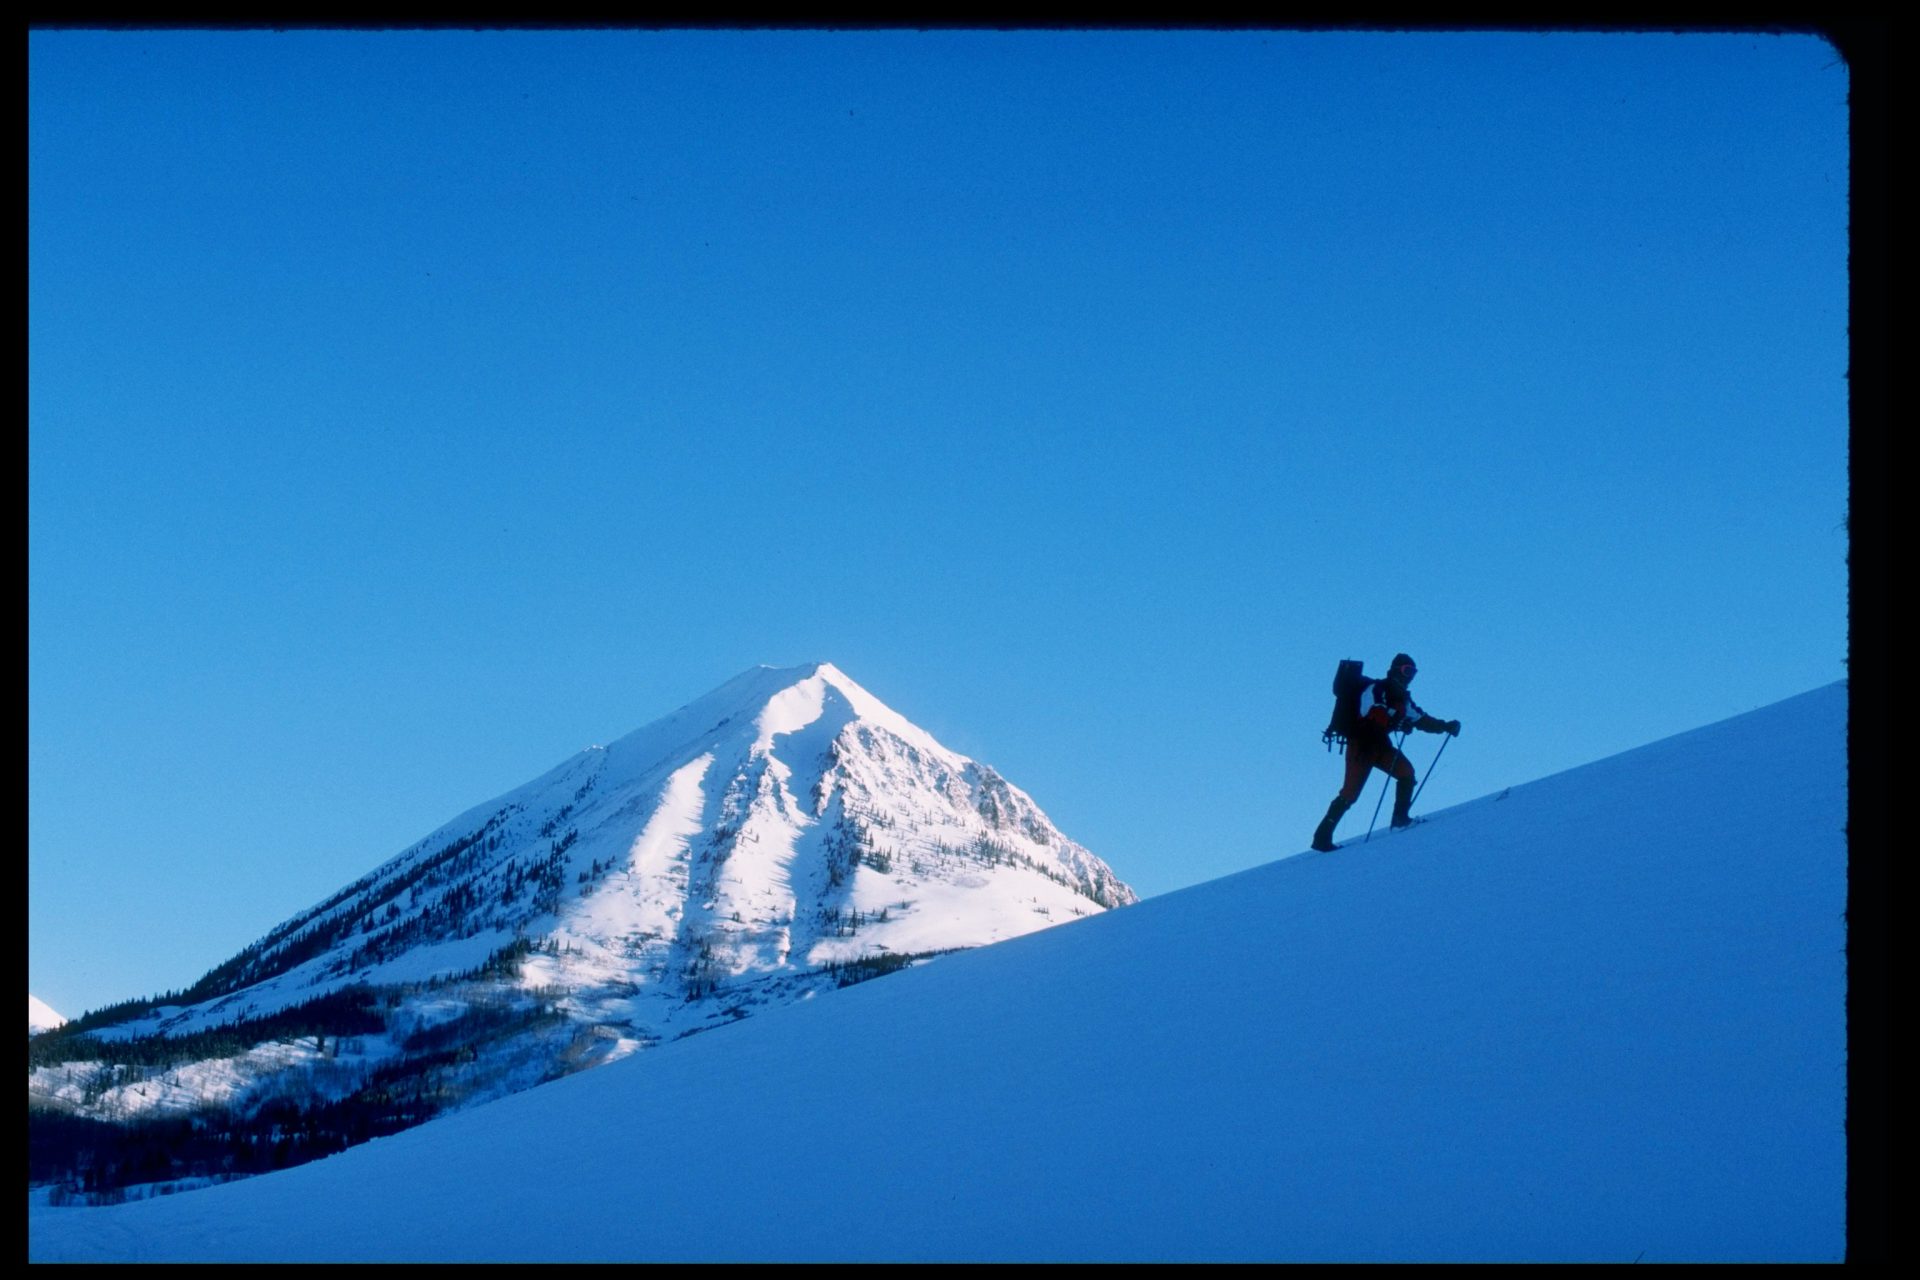 Ultimate Survival: A look at some of the most dangerous mountain climbing missions